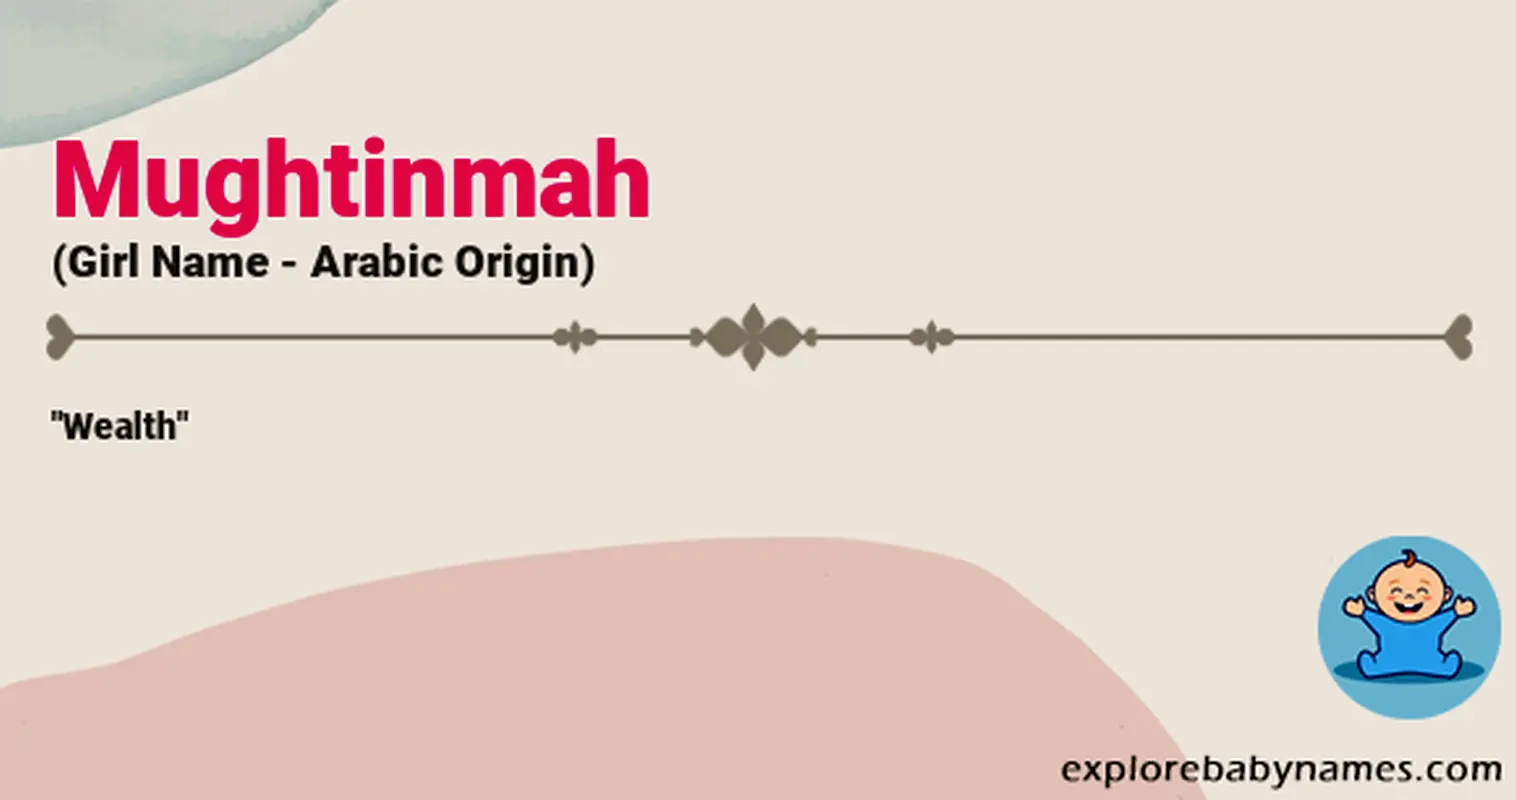 Meaning of Mughtinmah